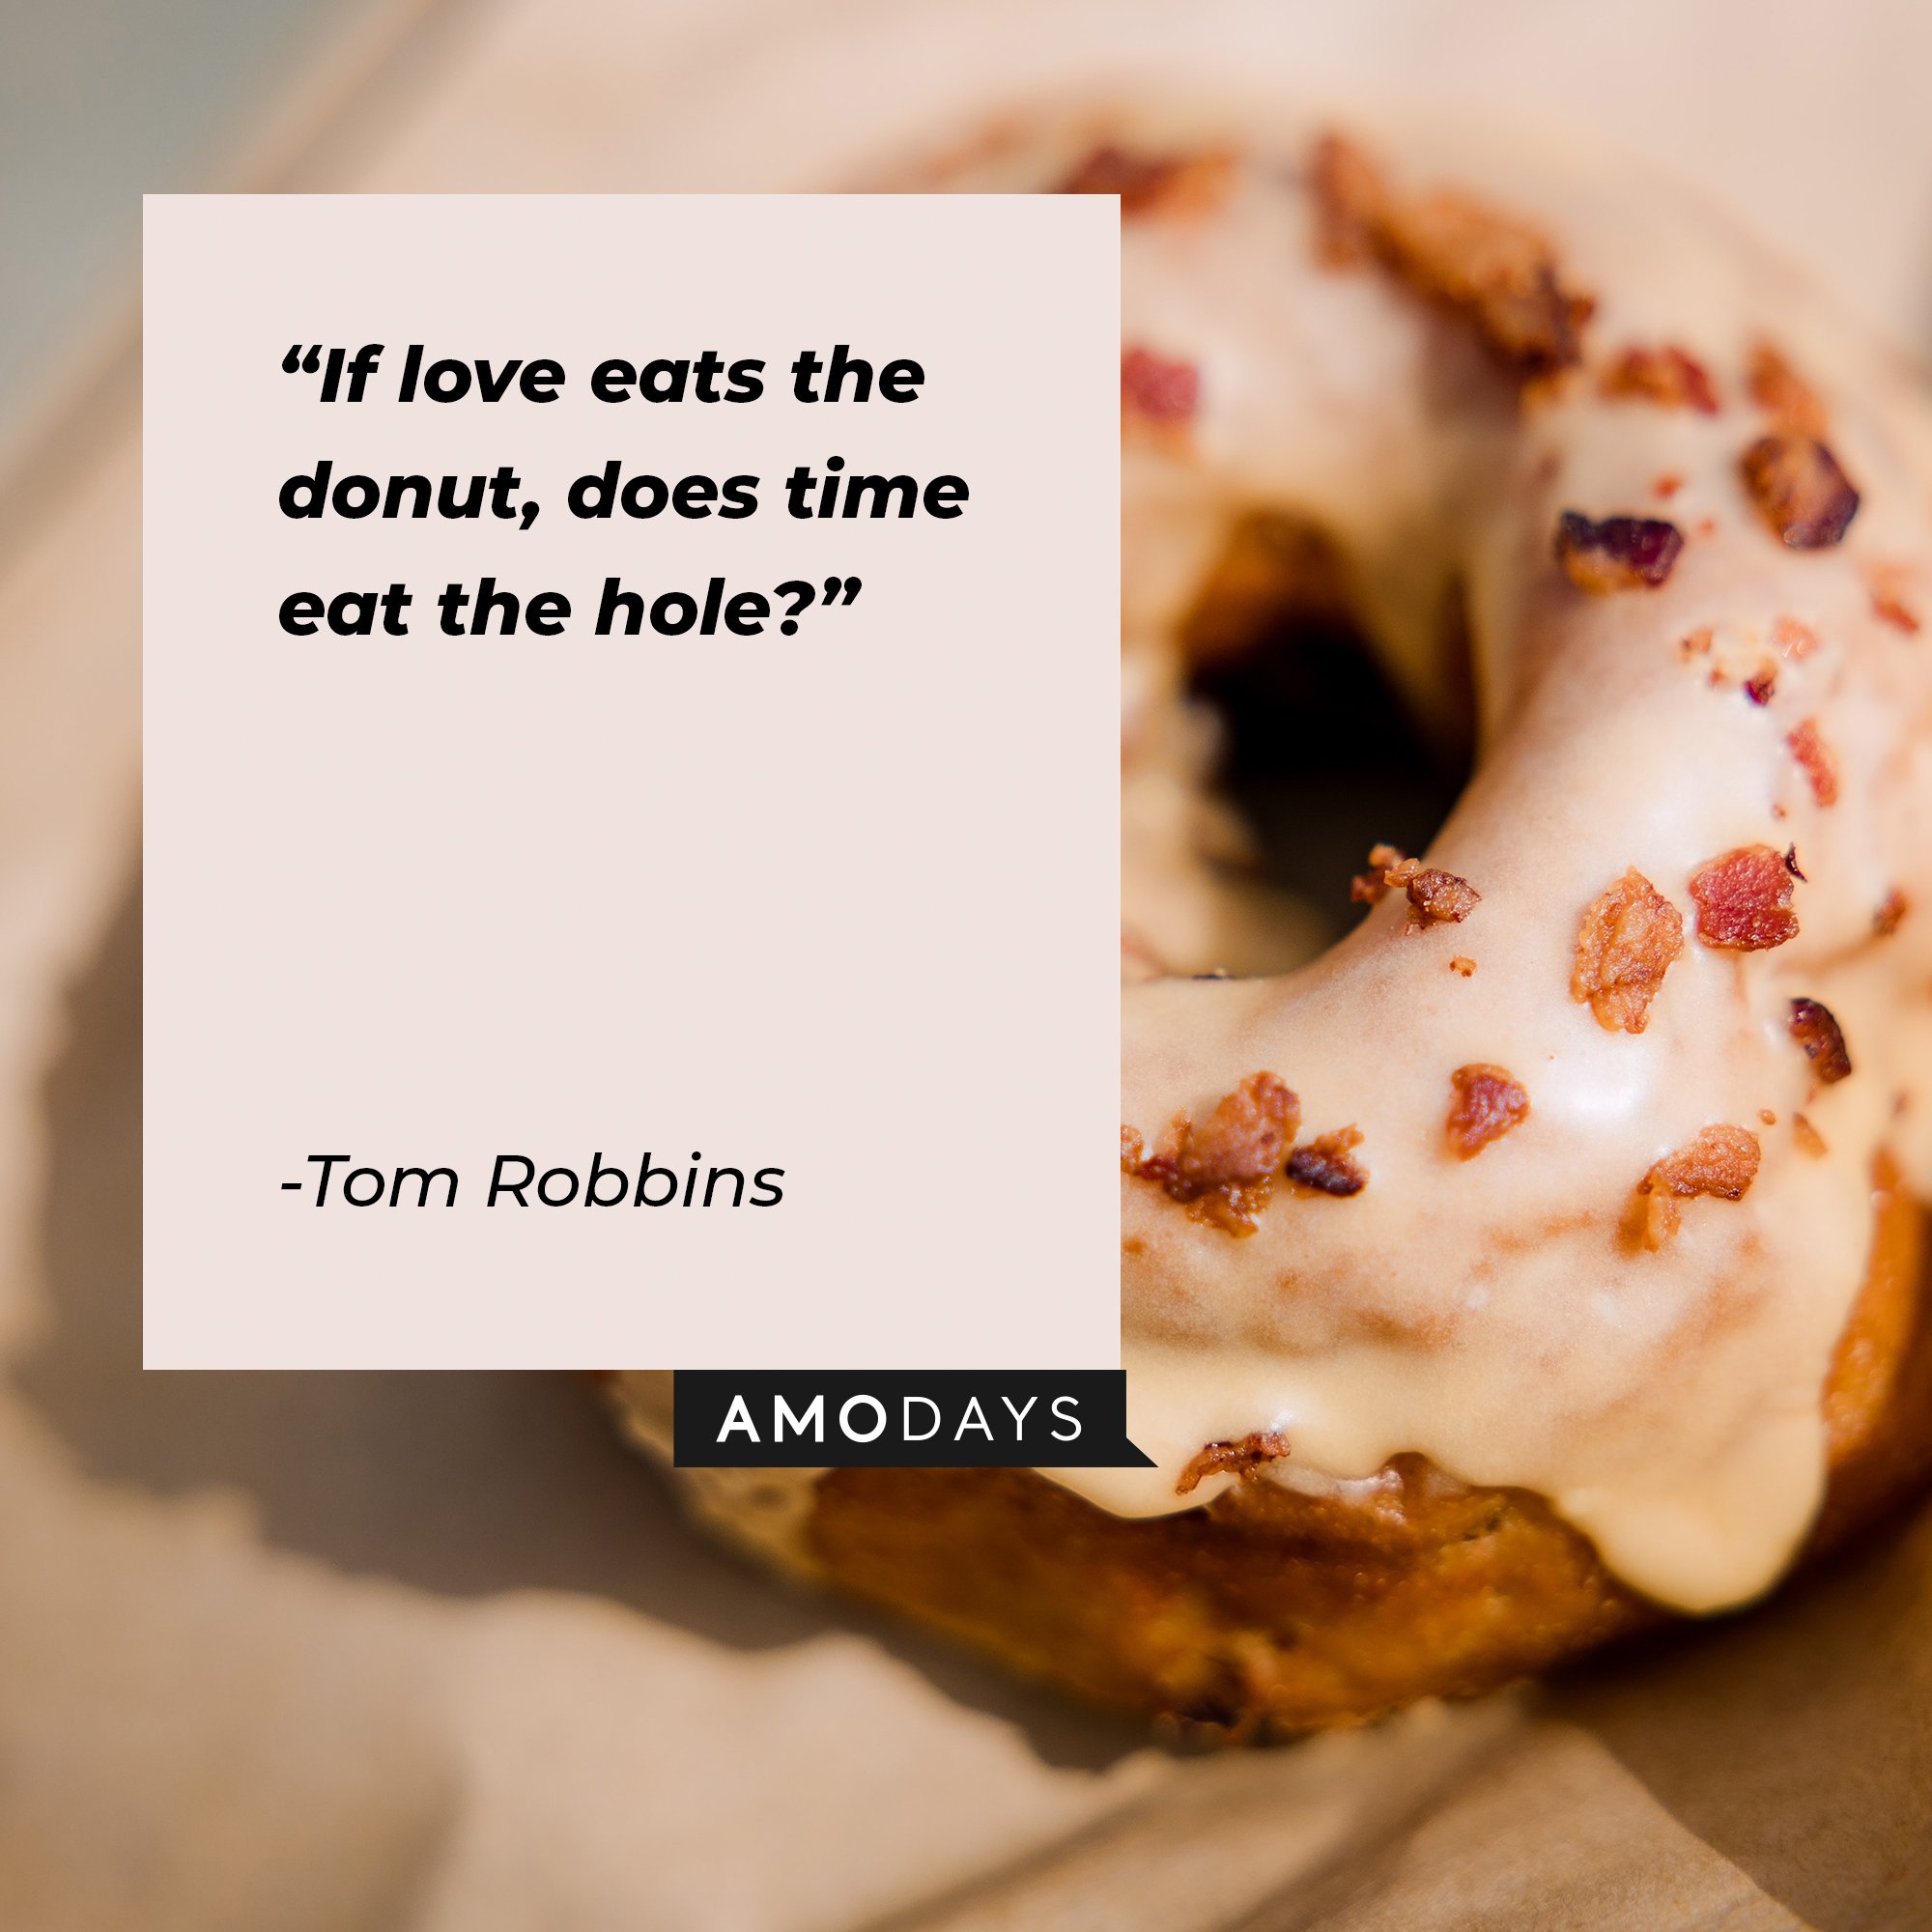 Tom Robbins' quote: "If love eats the donut, does time eat the hole?" | Image: AmoDays